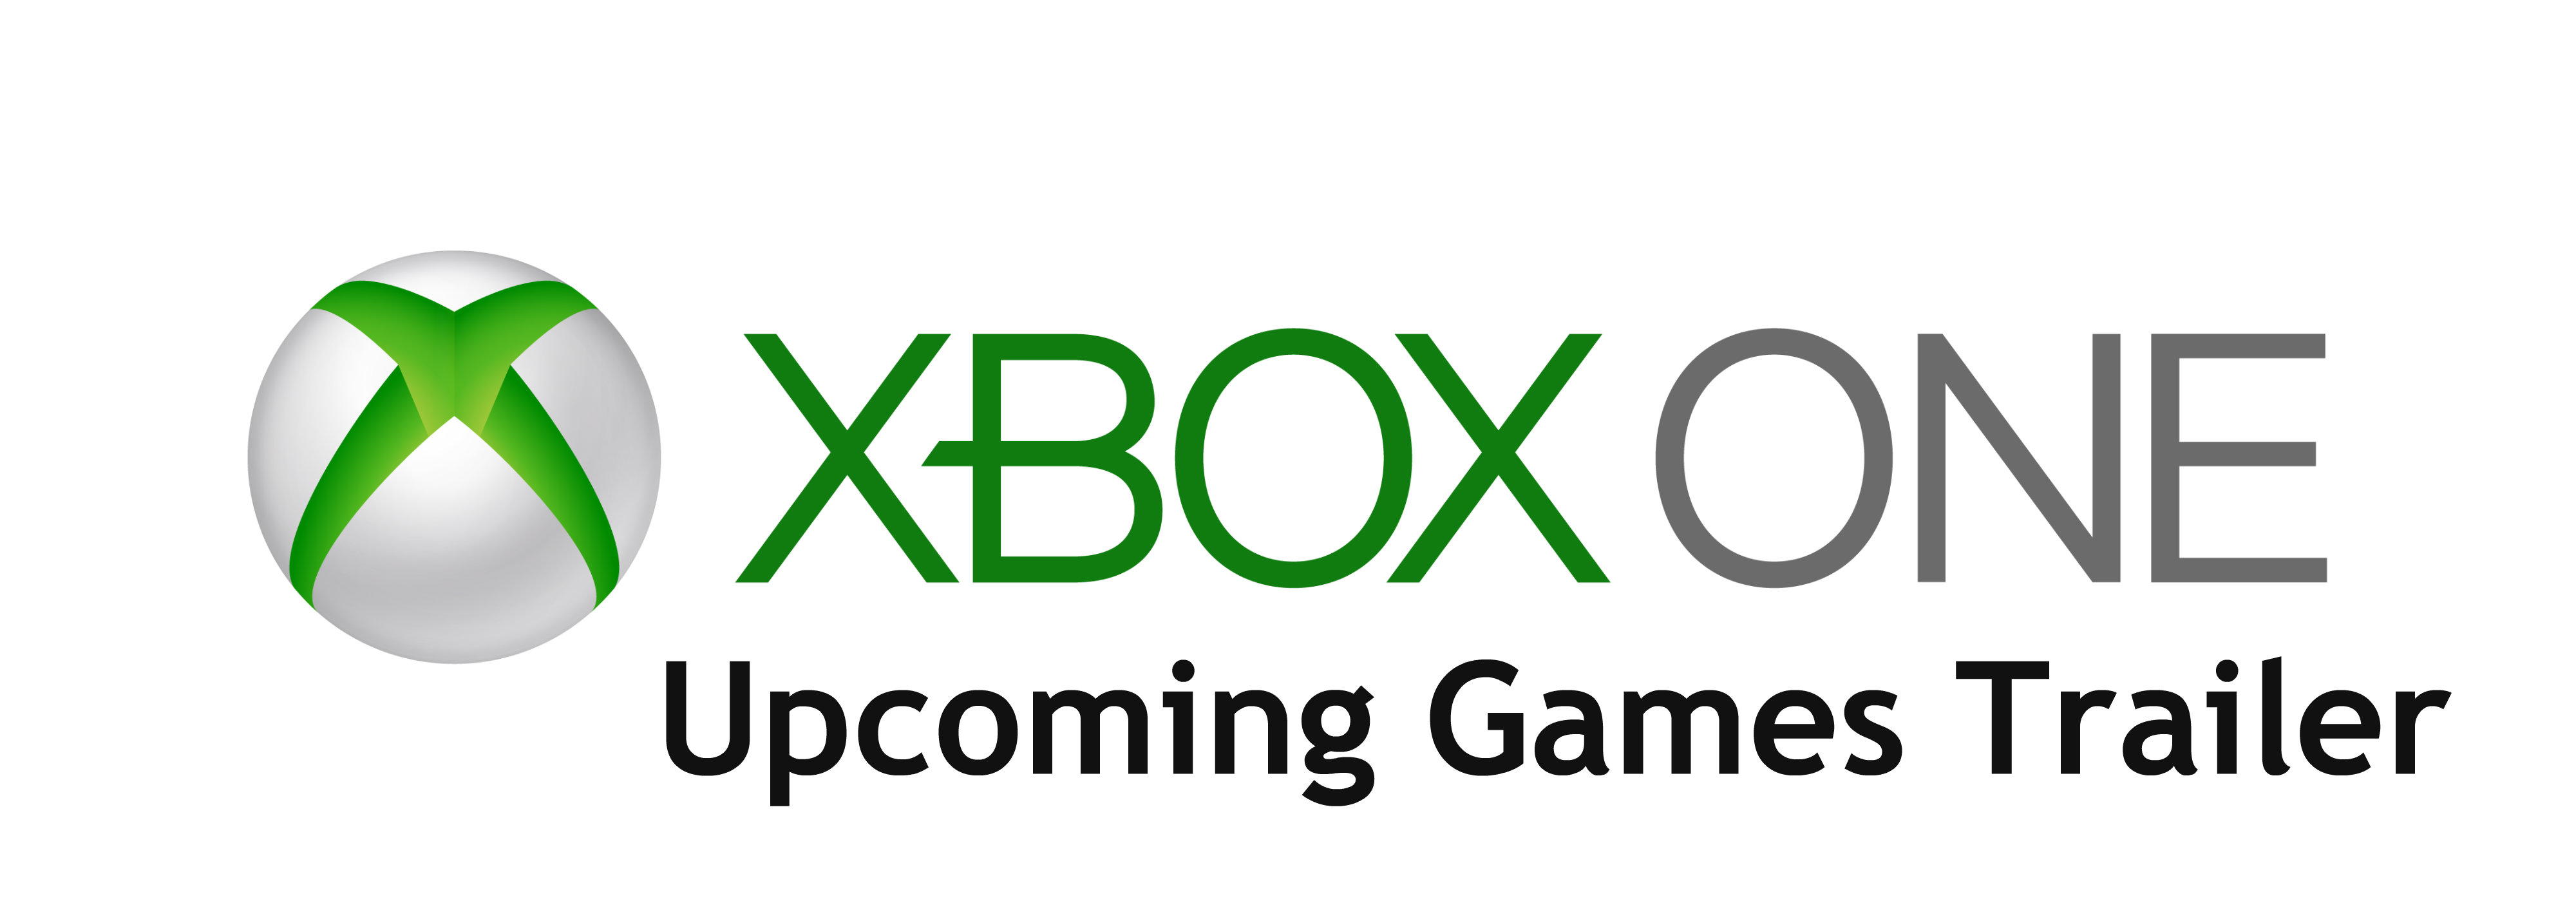 Xbox One Upcoming Games Trailer